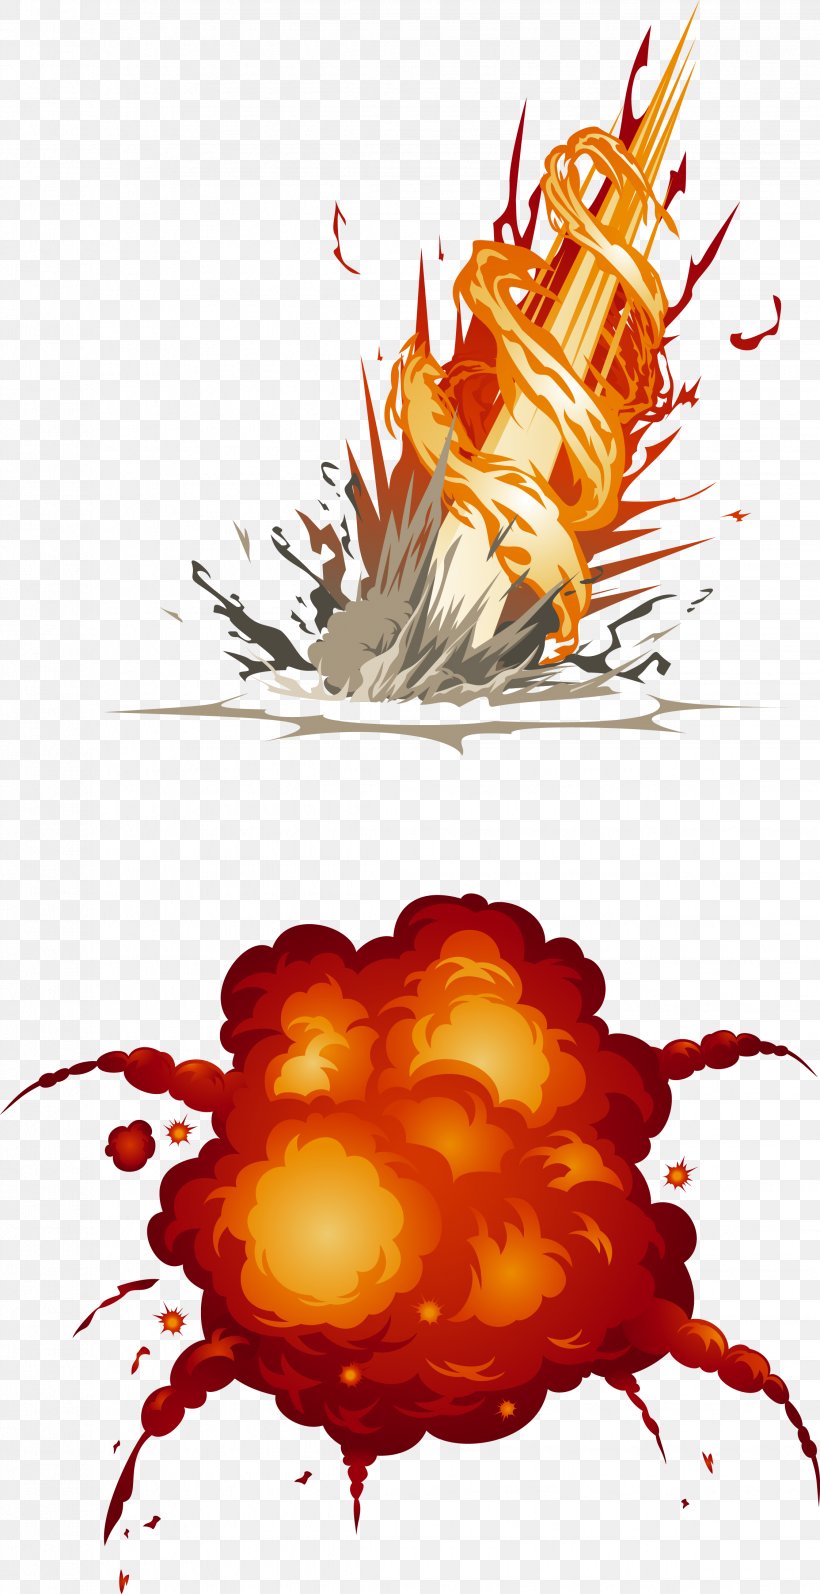 Explosion Animation Download, PNG, 2244x4364px, Explosion, Animation